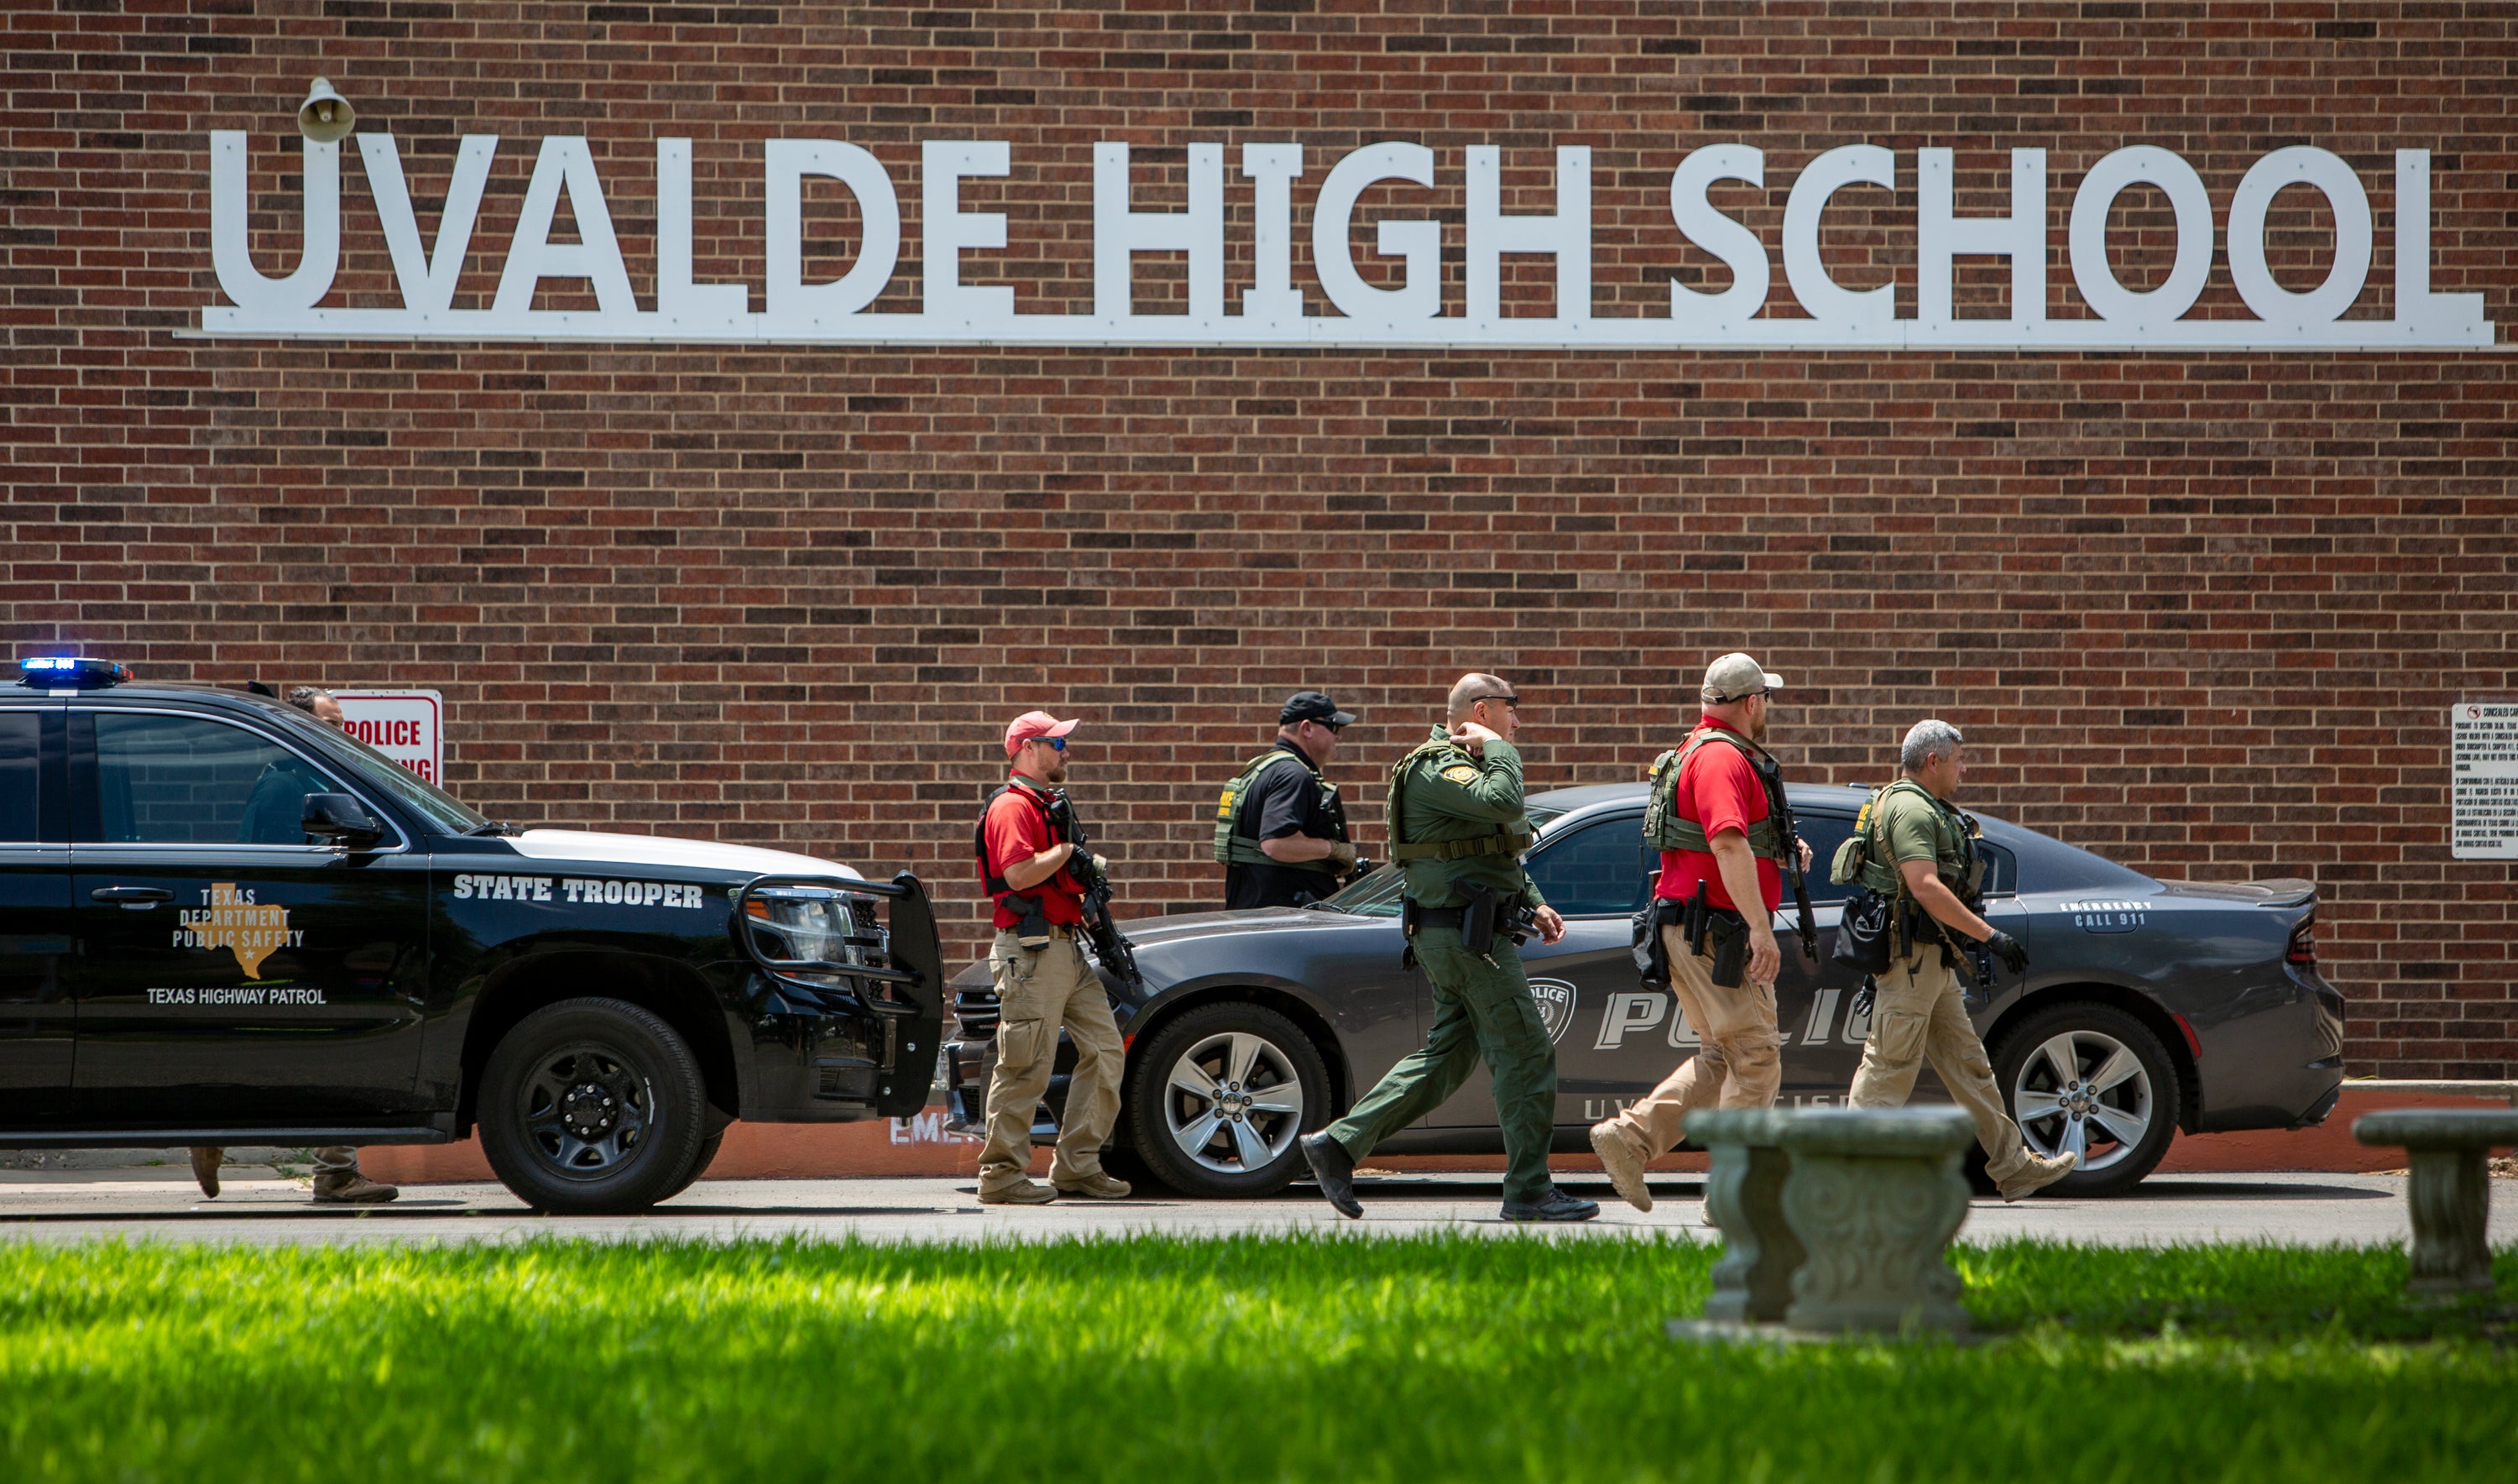 At the time of writing, 14 students and one teacher are dead in a shooting at an elementary school in Texas